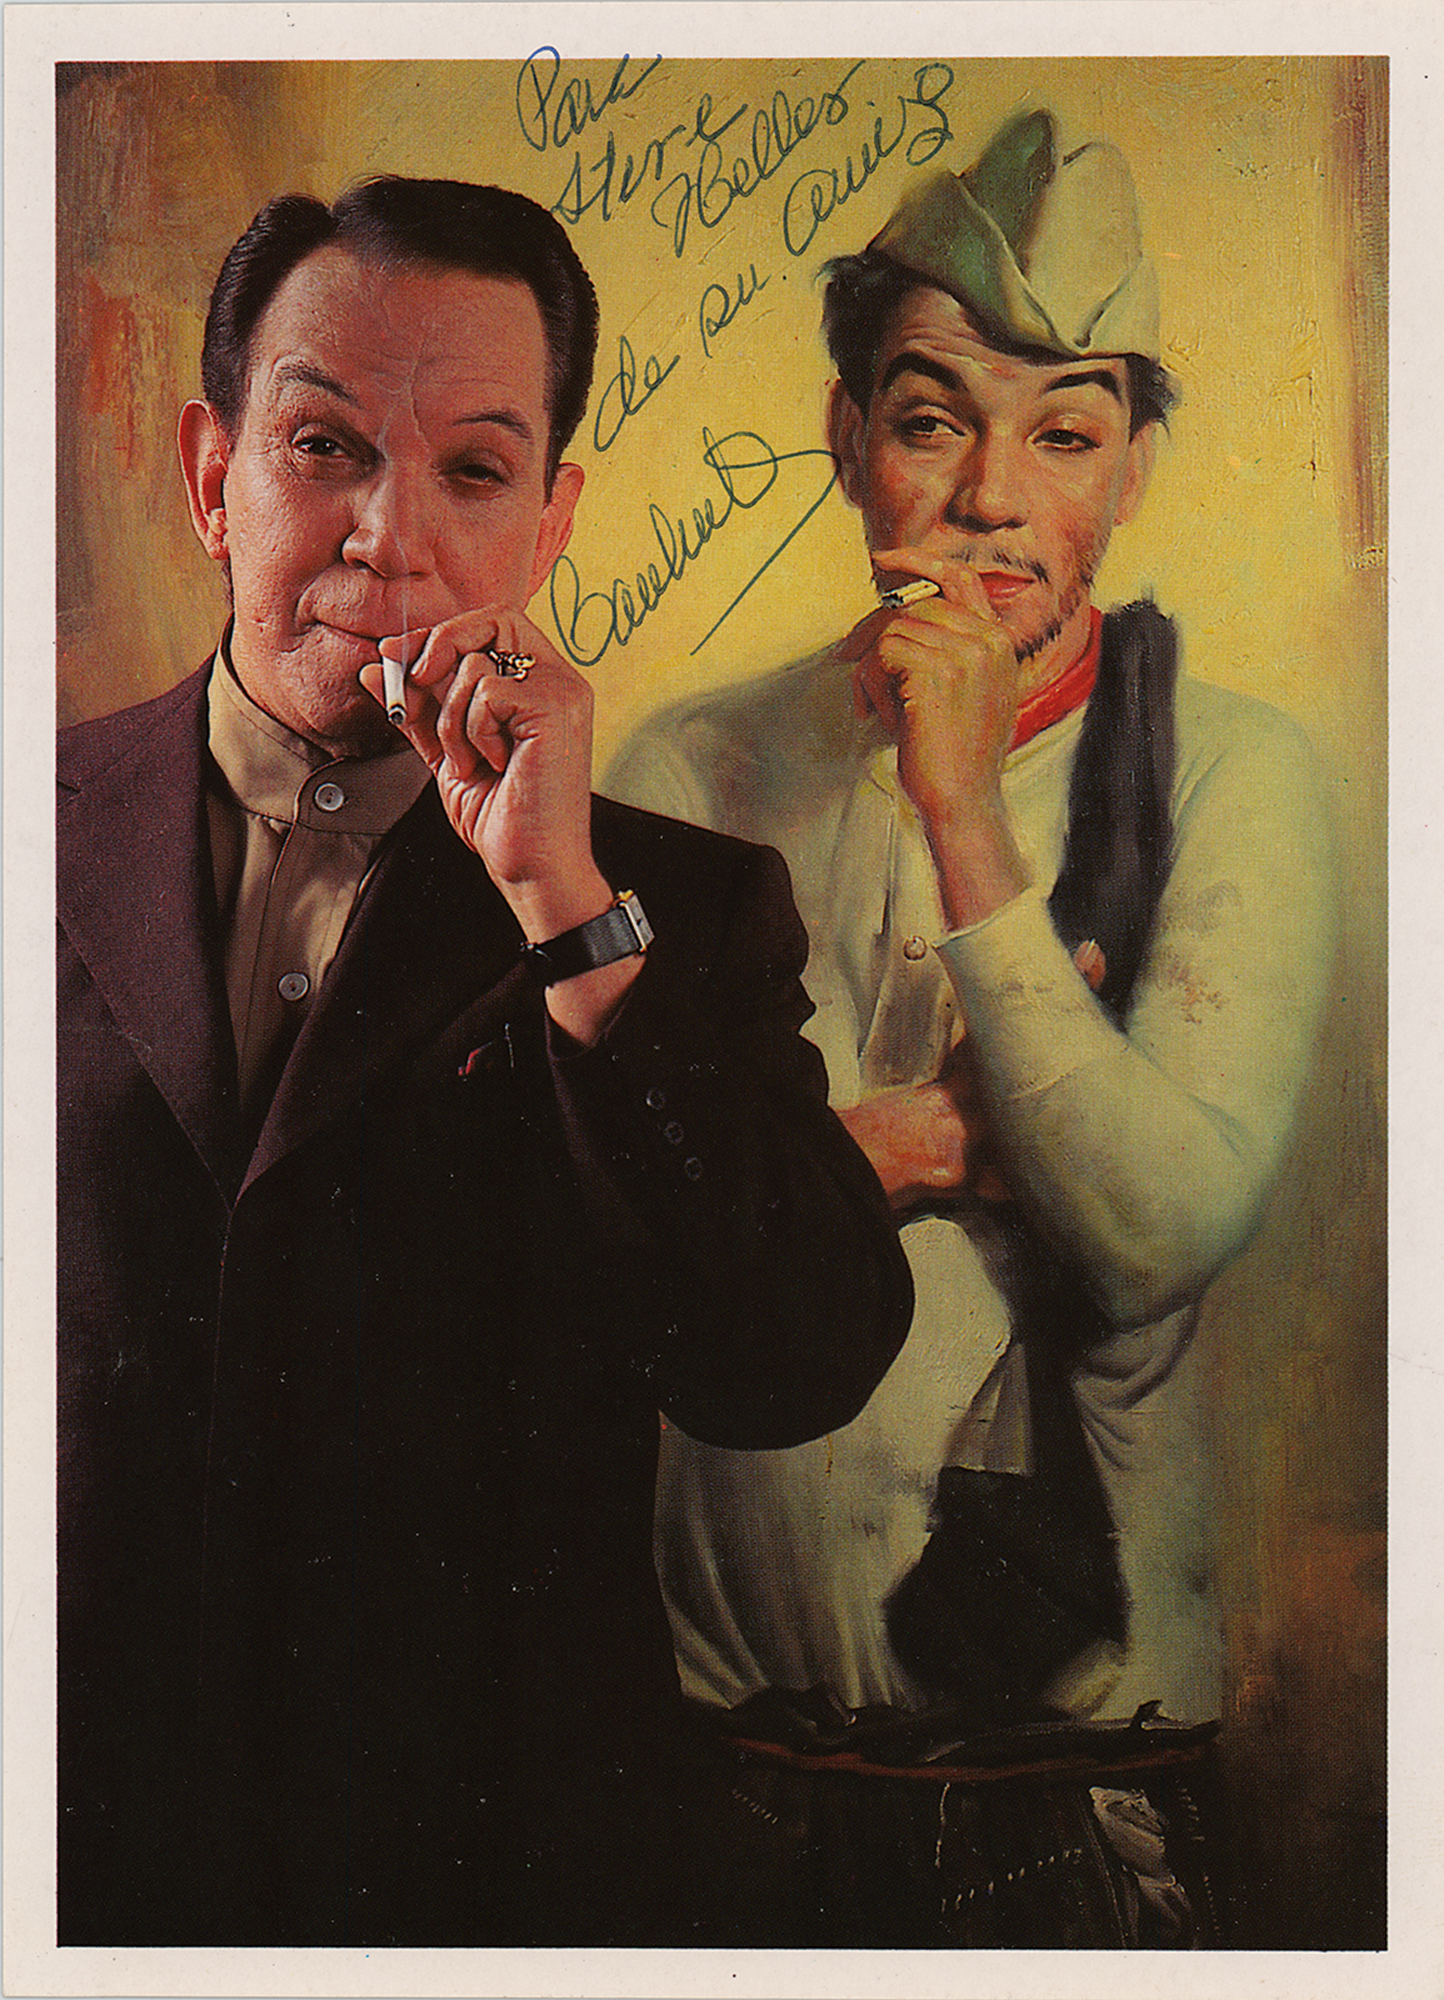 Lot #768 Cantinflas Signed Photograph